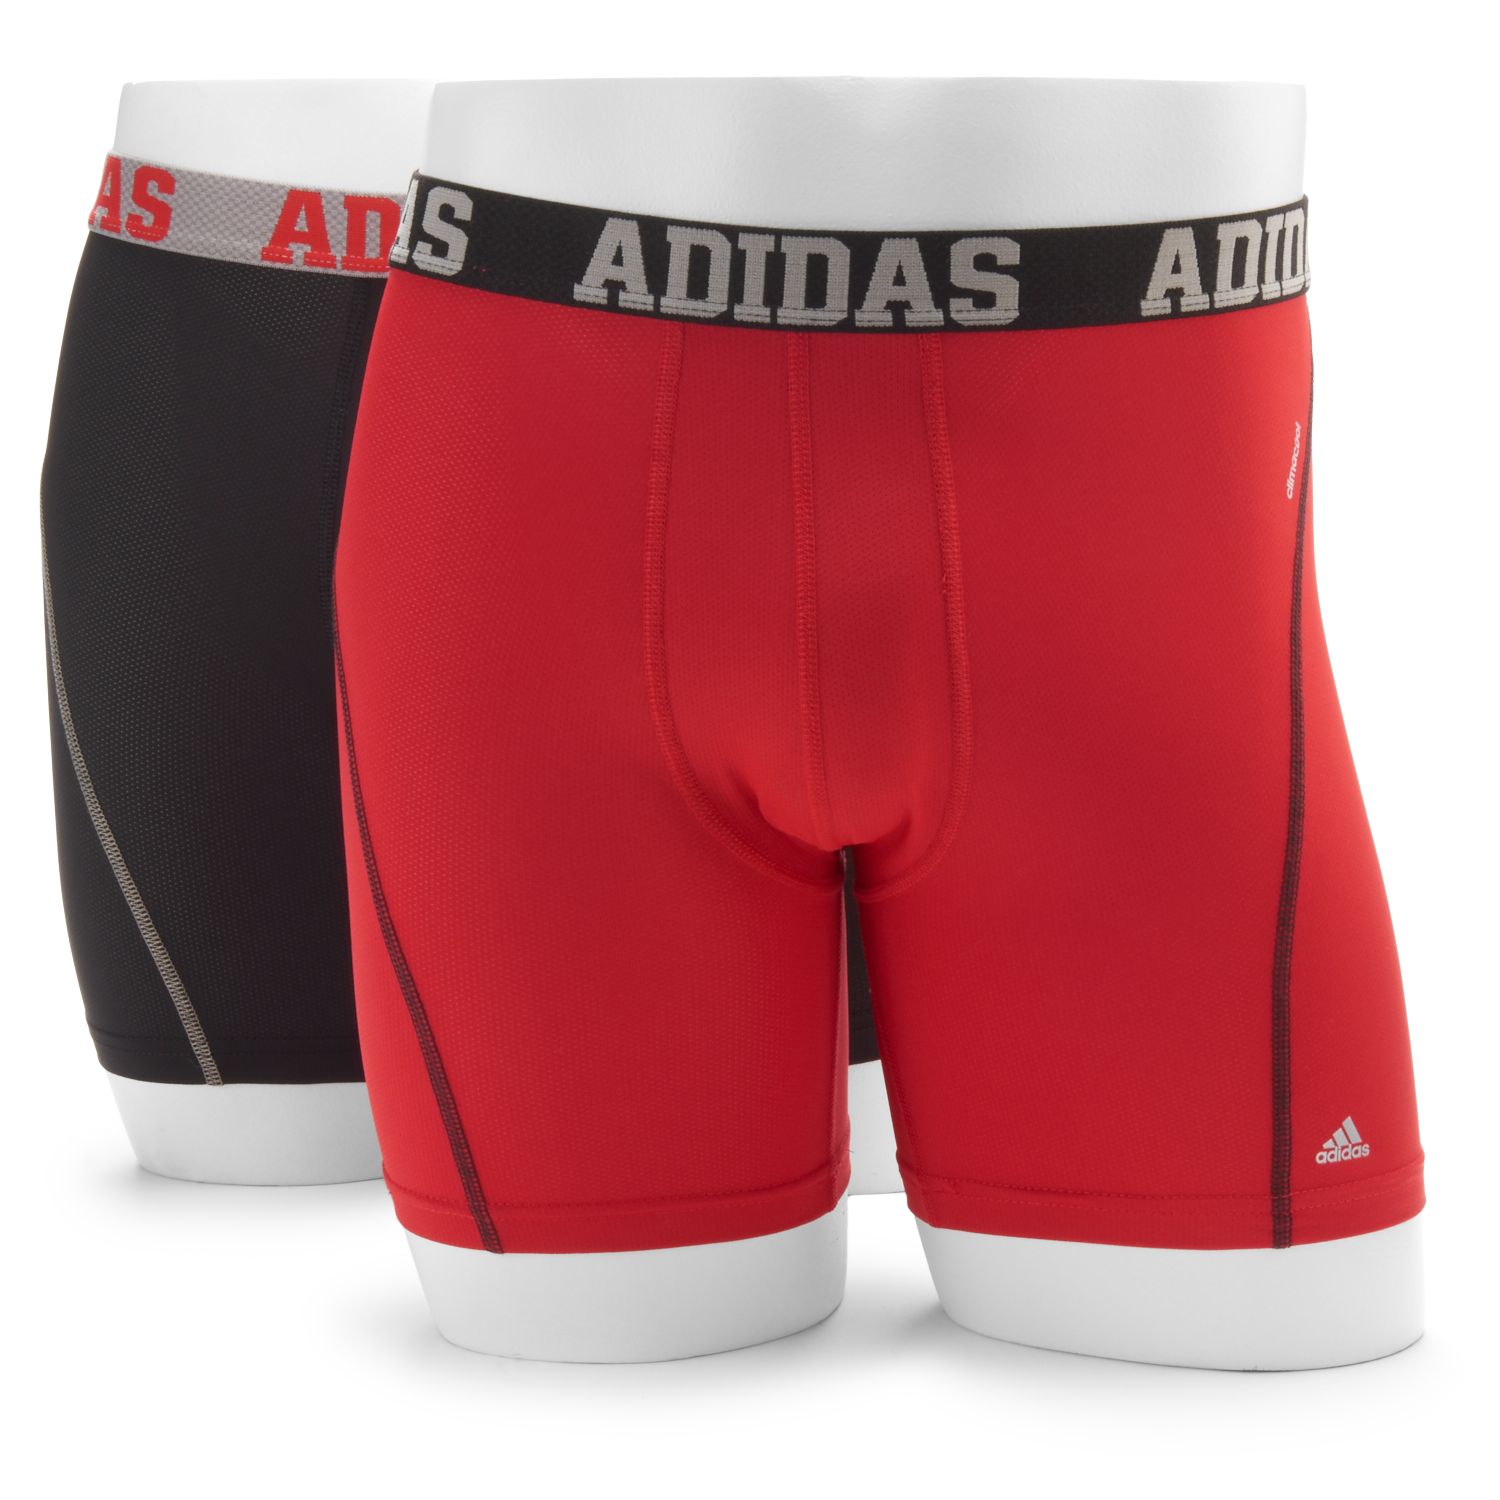 adidas men's climacool 7 midway briefs 92